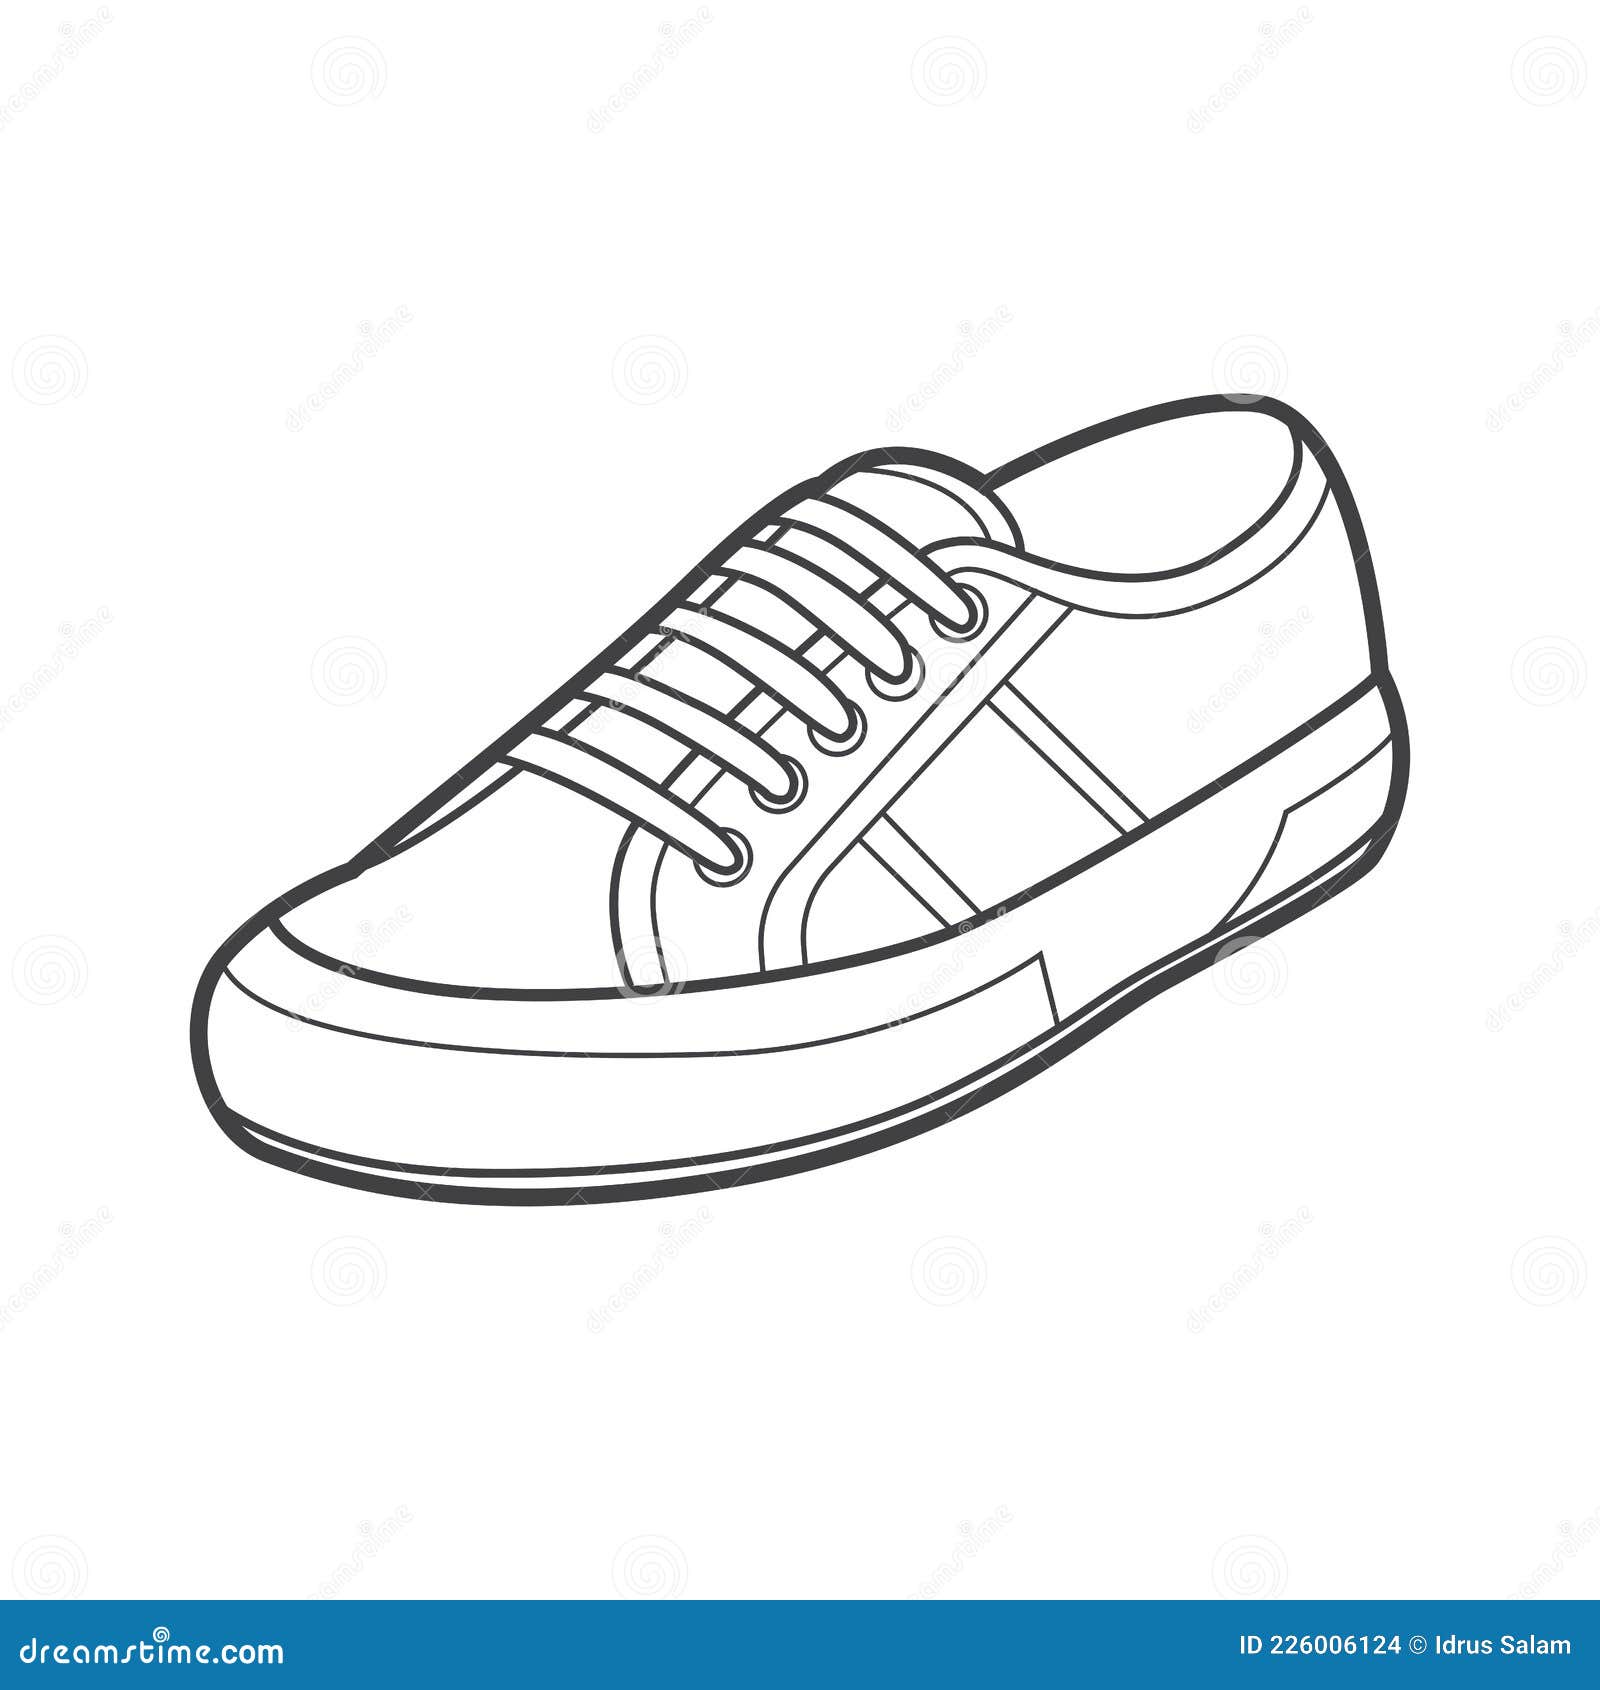 Shoes Sneaker Outline Drawing Vector, Sneakers Drawn in a Sketch Style ...